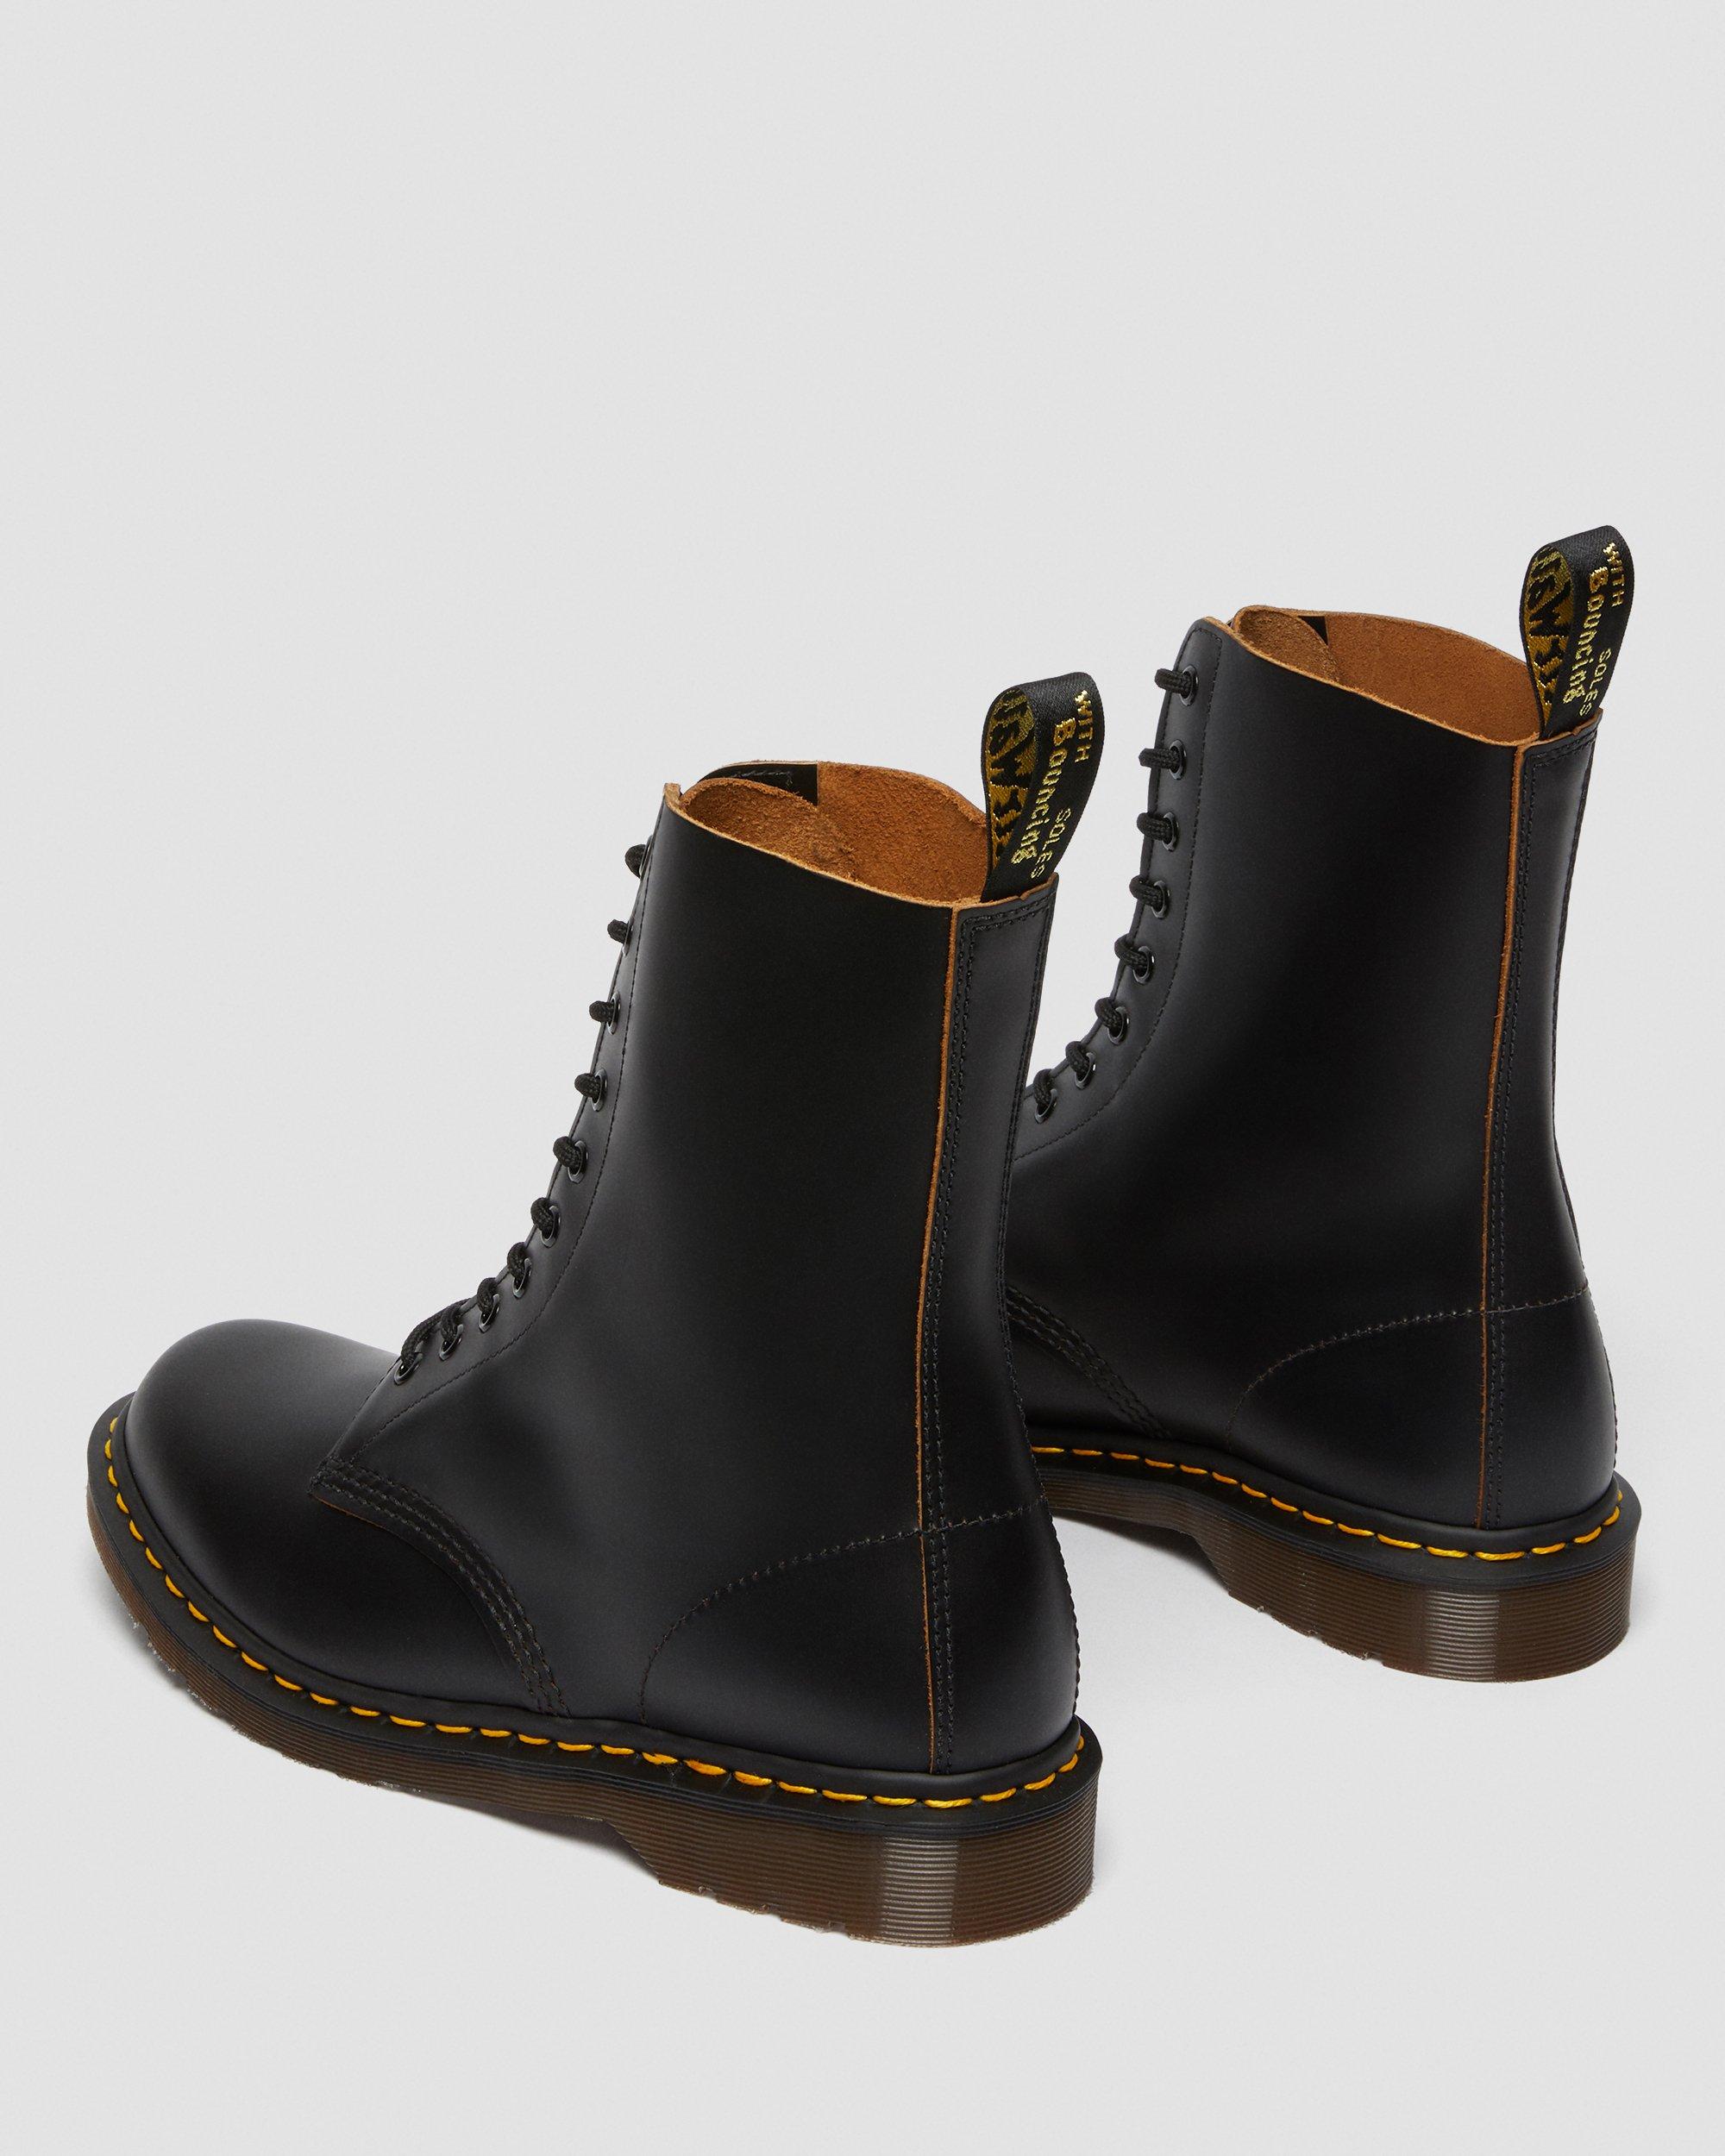 1490 Vintage Made In England Mid Calf Boots, Black | Dr. Martens